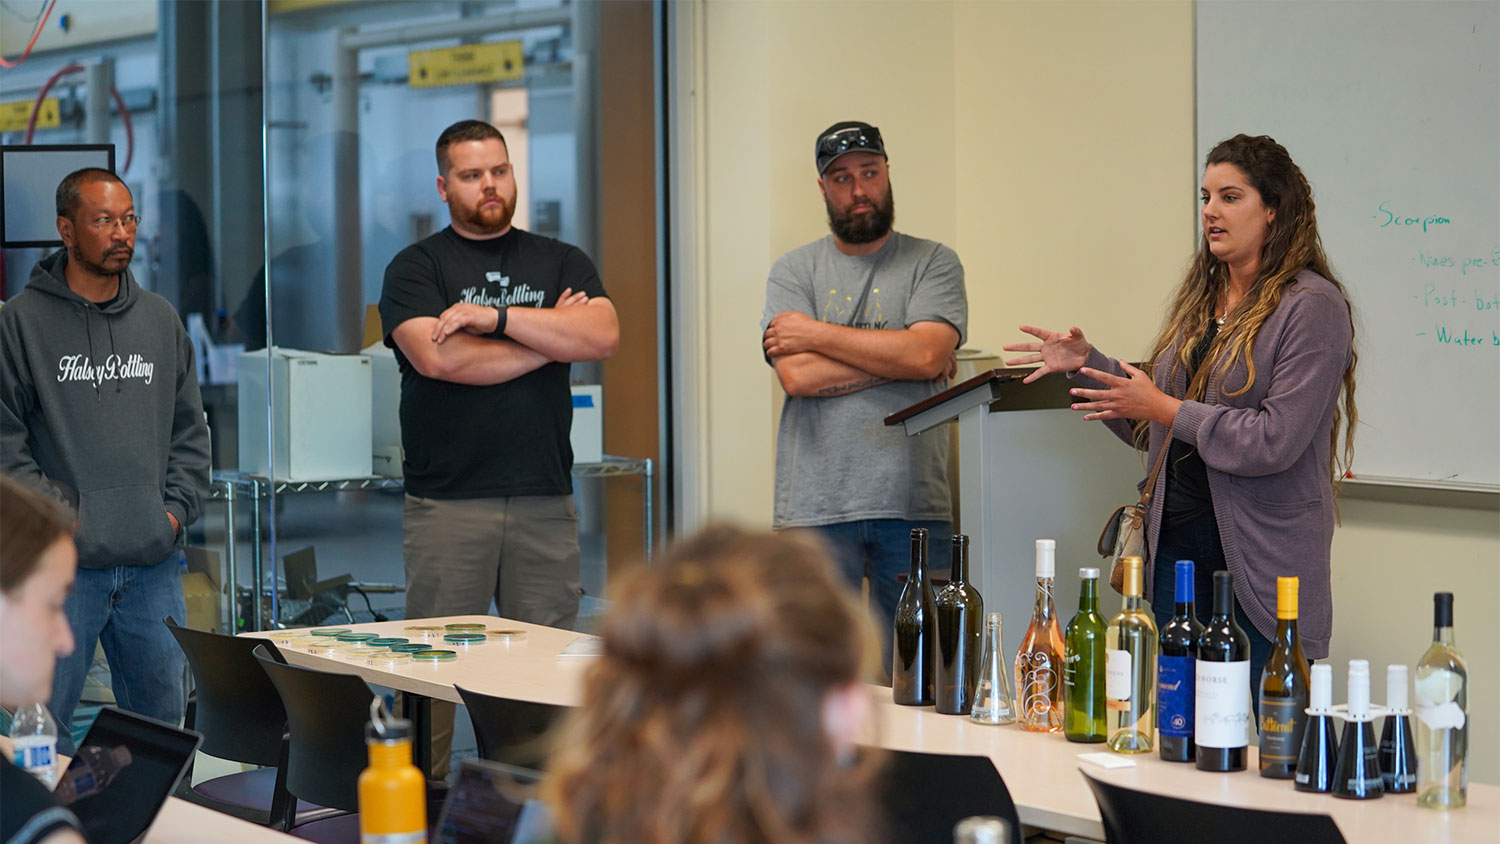 Wine bottling logistics expert, Erin Halsey, and her team at Halsey Bottling answer viticulture and enology students' questions in class.